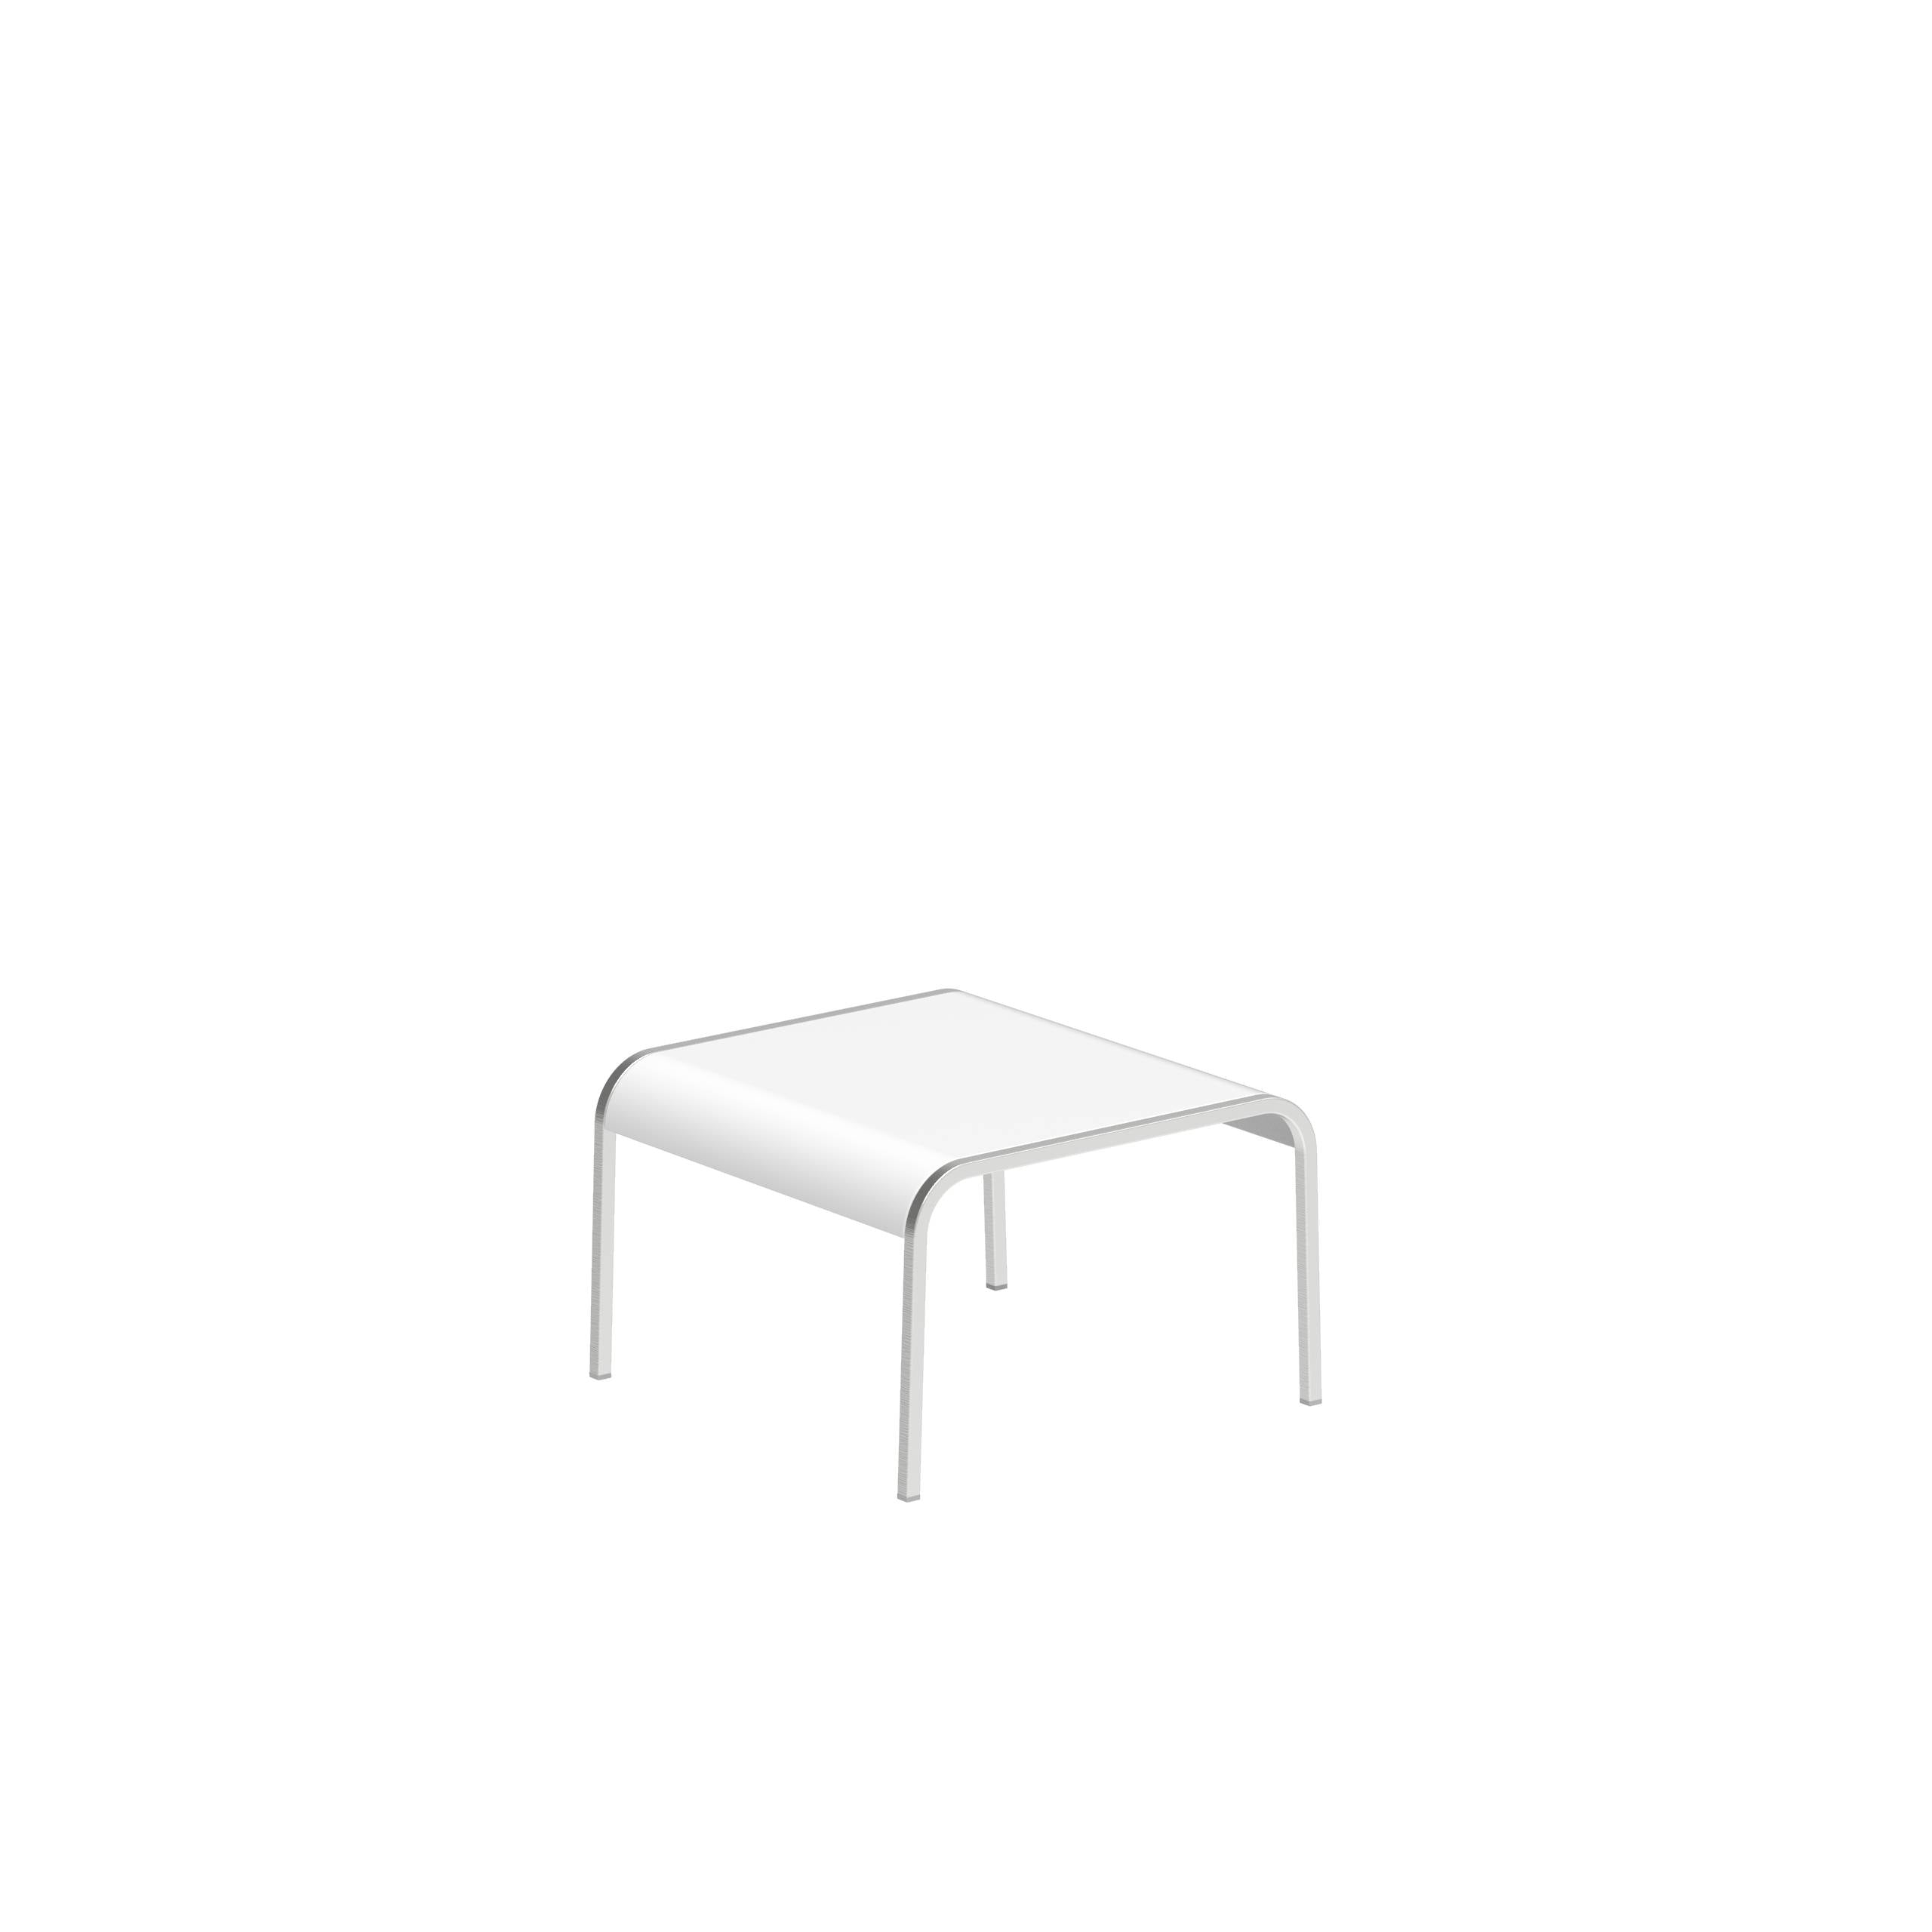 Qt50 Side Table 50x50cm With Alu Top White